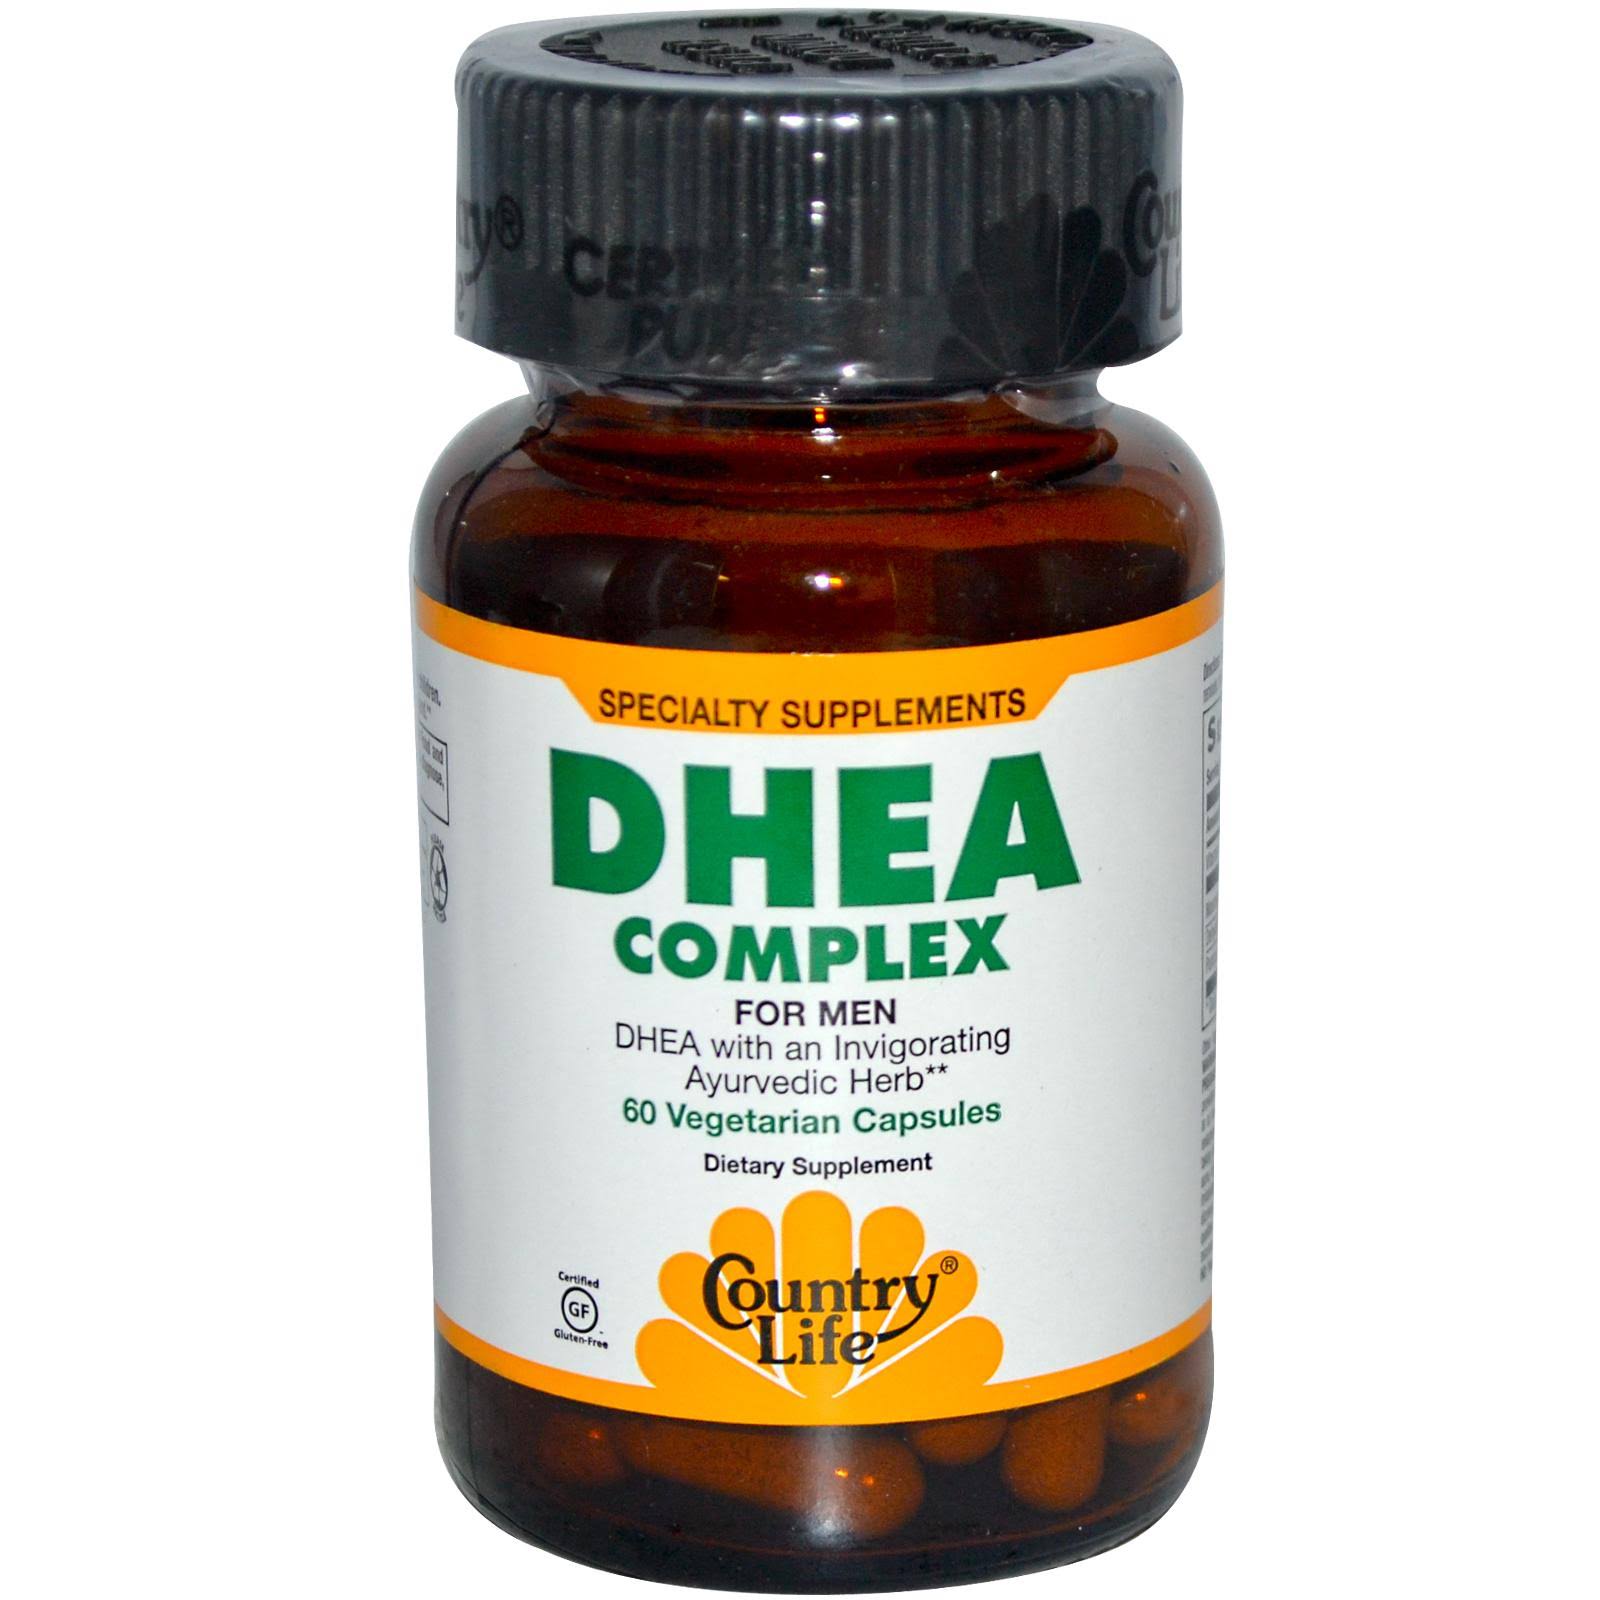 Country Life DHEA Complex For Men - 60 capsules